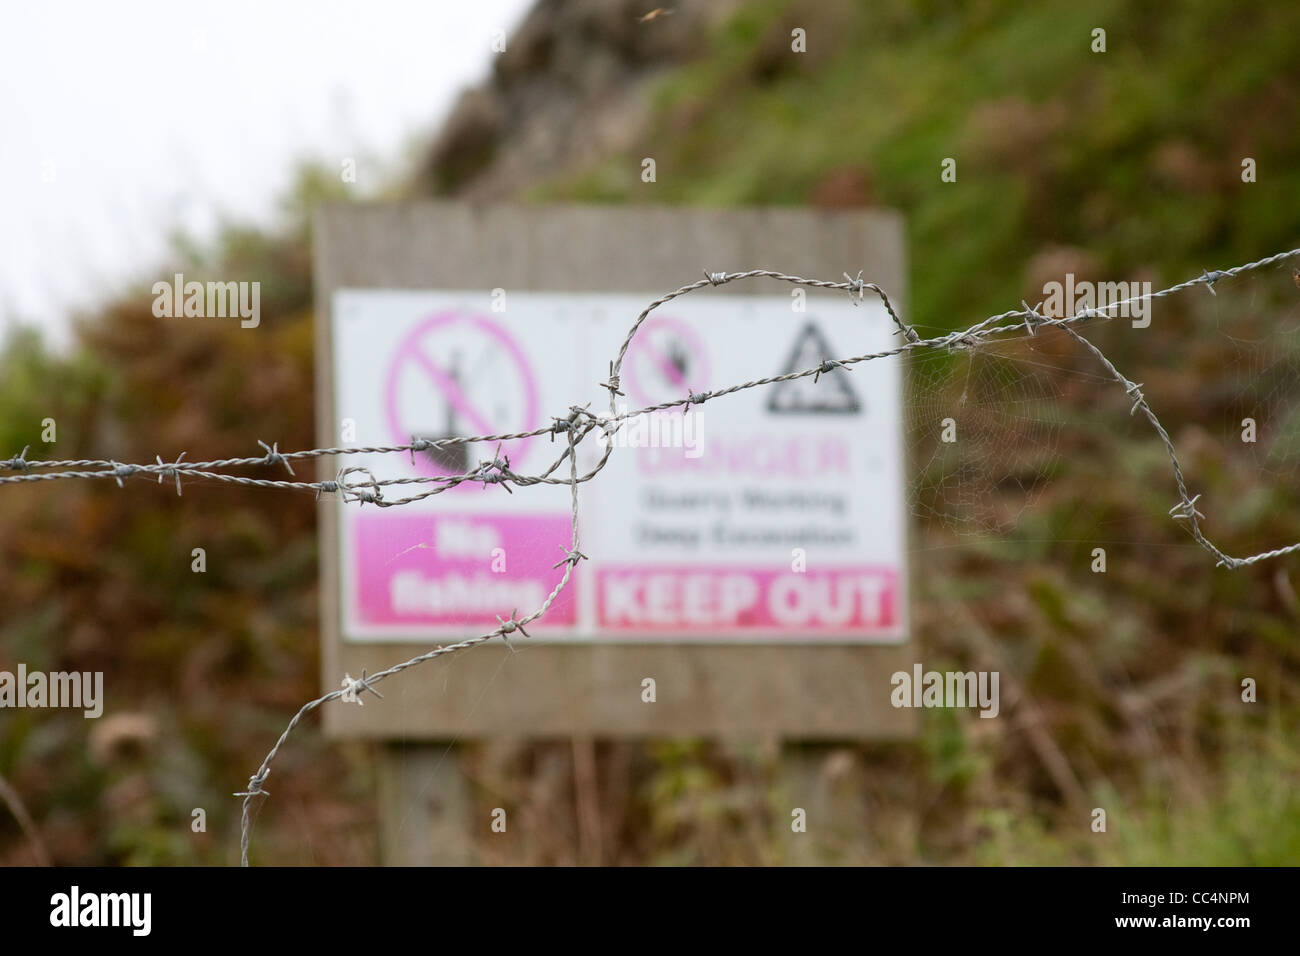 Danger Keep Out Sign  Focus Emphasis  Barbed Wire Stock Photo